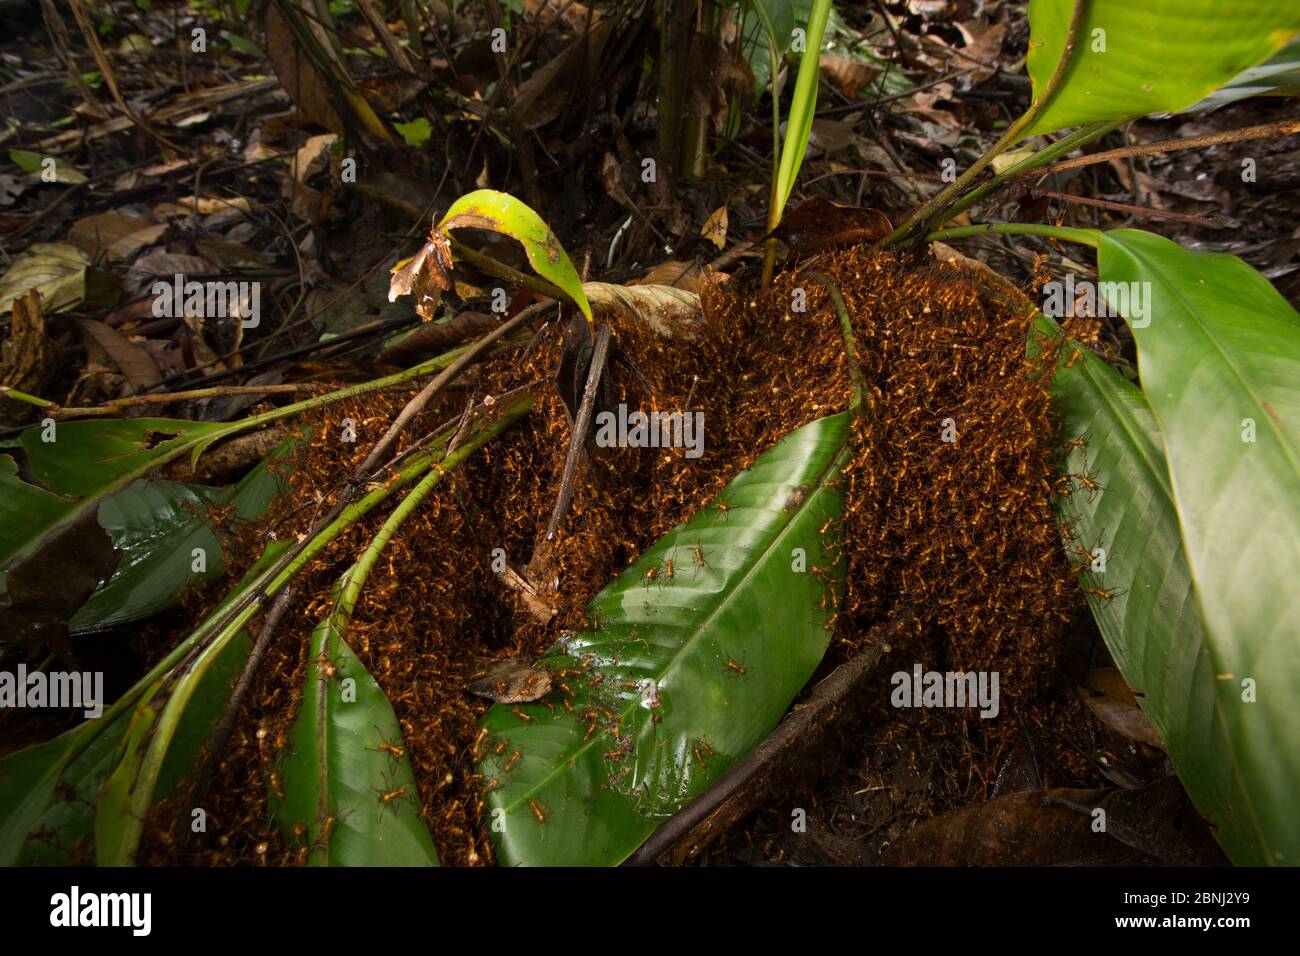 Army ants (Eciton hamatum) forming a  bivouac or temporary nest formed by the bodies of the insects, Barro Colorado Island, Gatun Lake, Panama Canal, Stock Photo